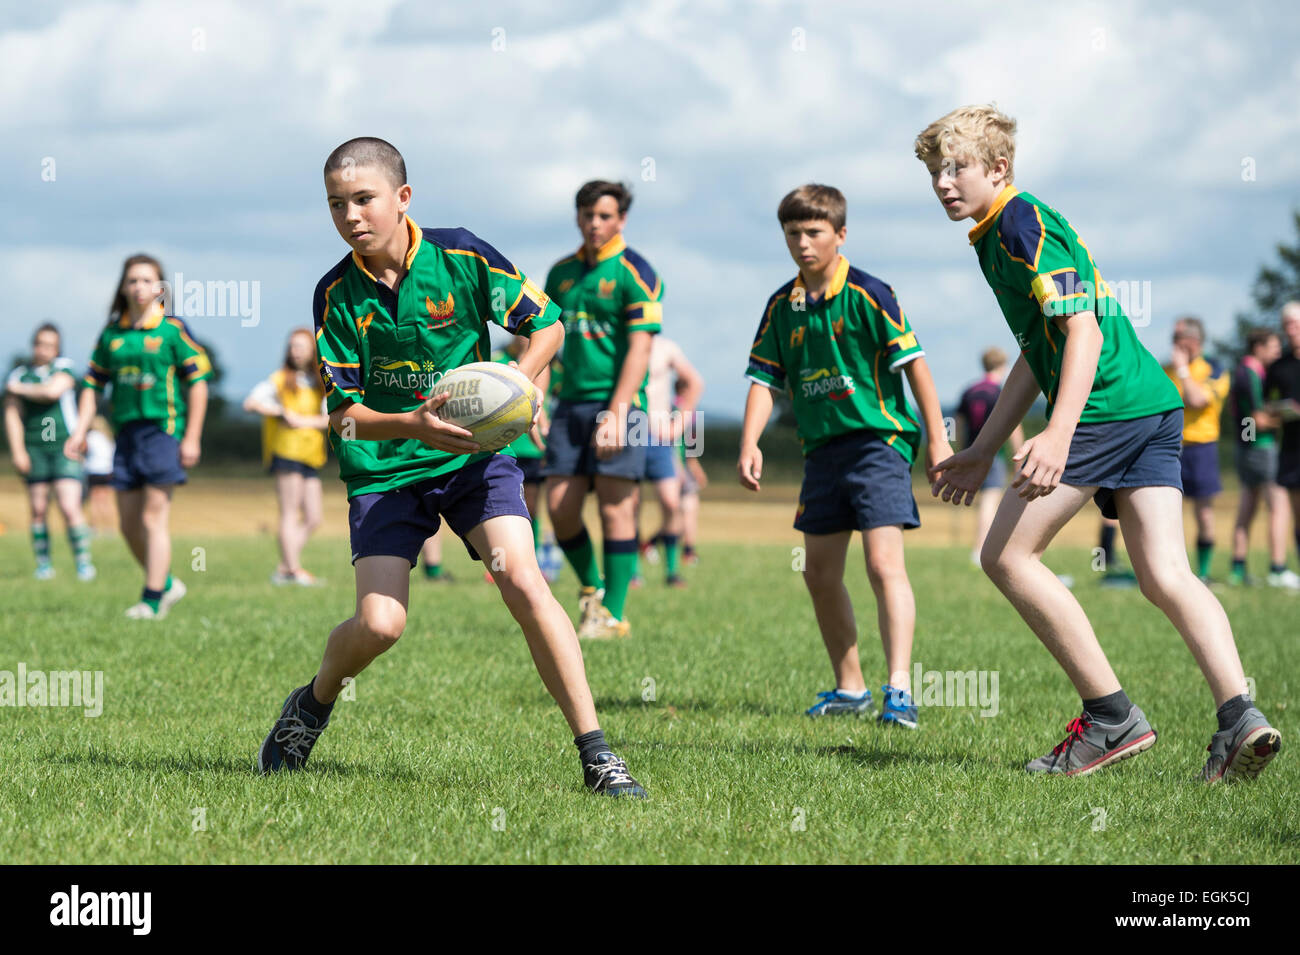 North Dorset RFC Open Day. Junior rugby players in action. Stock Photo